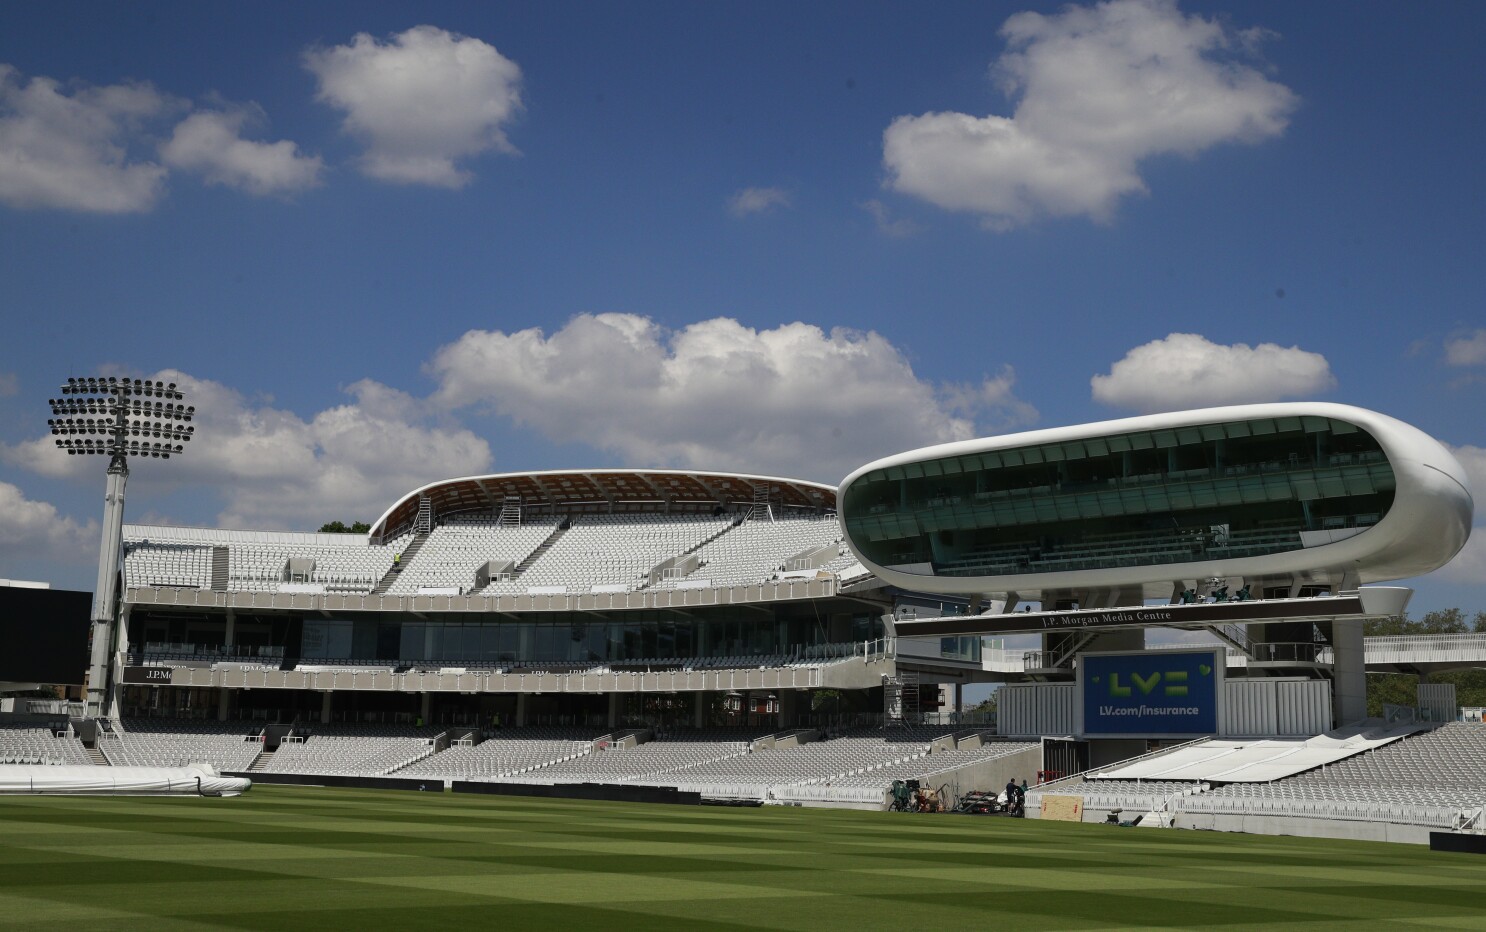 England Pakistan Odi At Lord S Approved For Full Capacity The San Diego Union Tribune